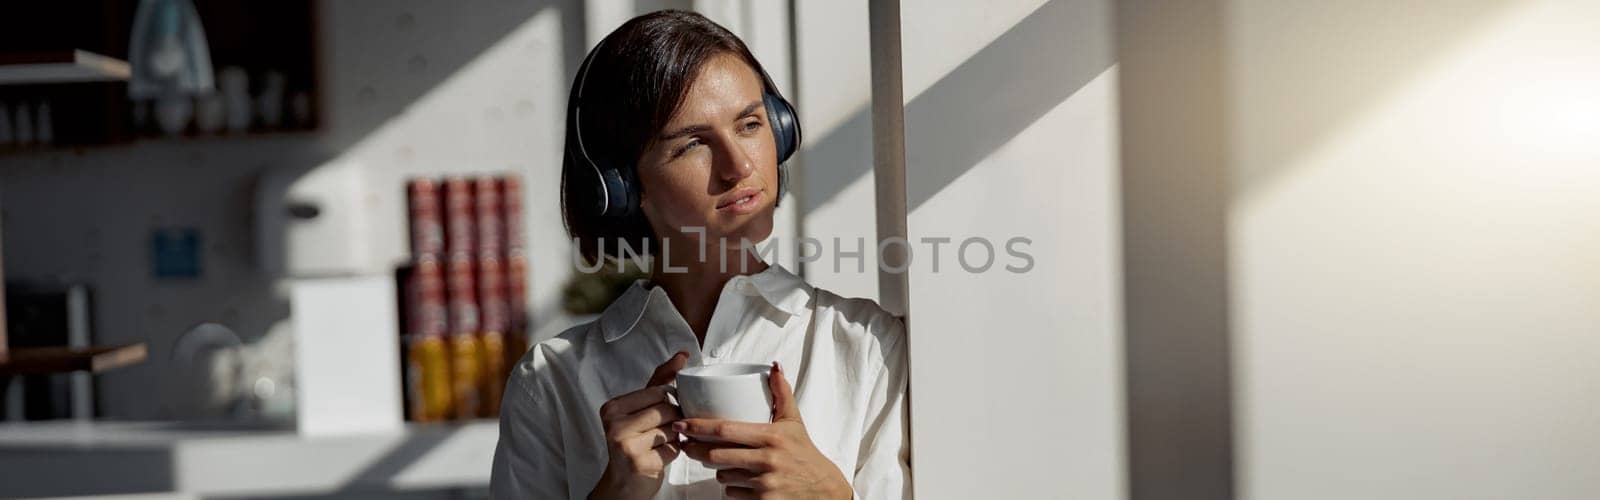 Business woman in headphones holding a cup of coffee while standing near window at office by Yaroslav_astakhov